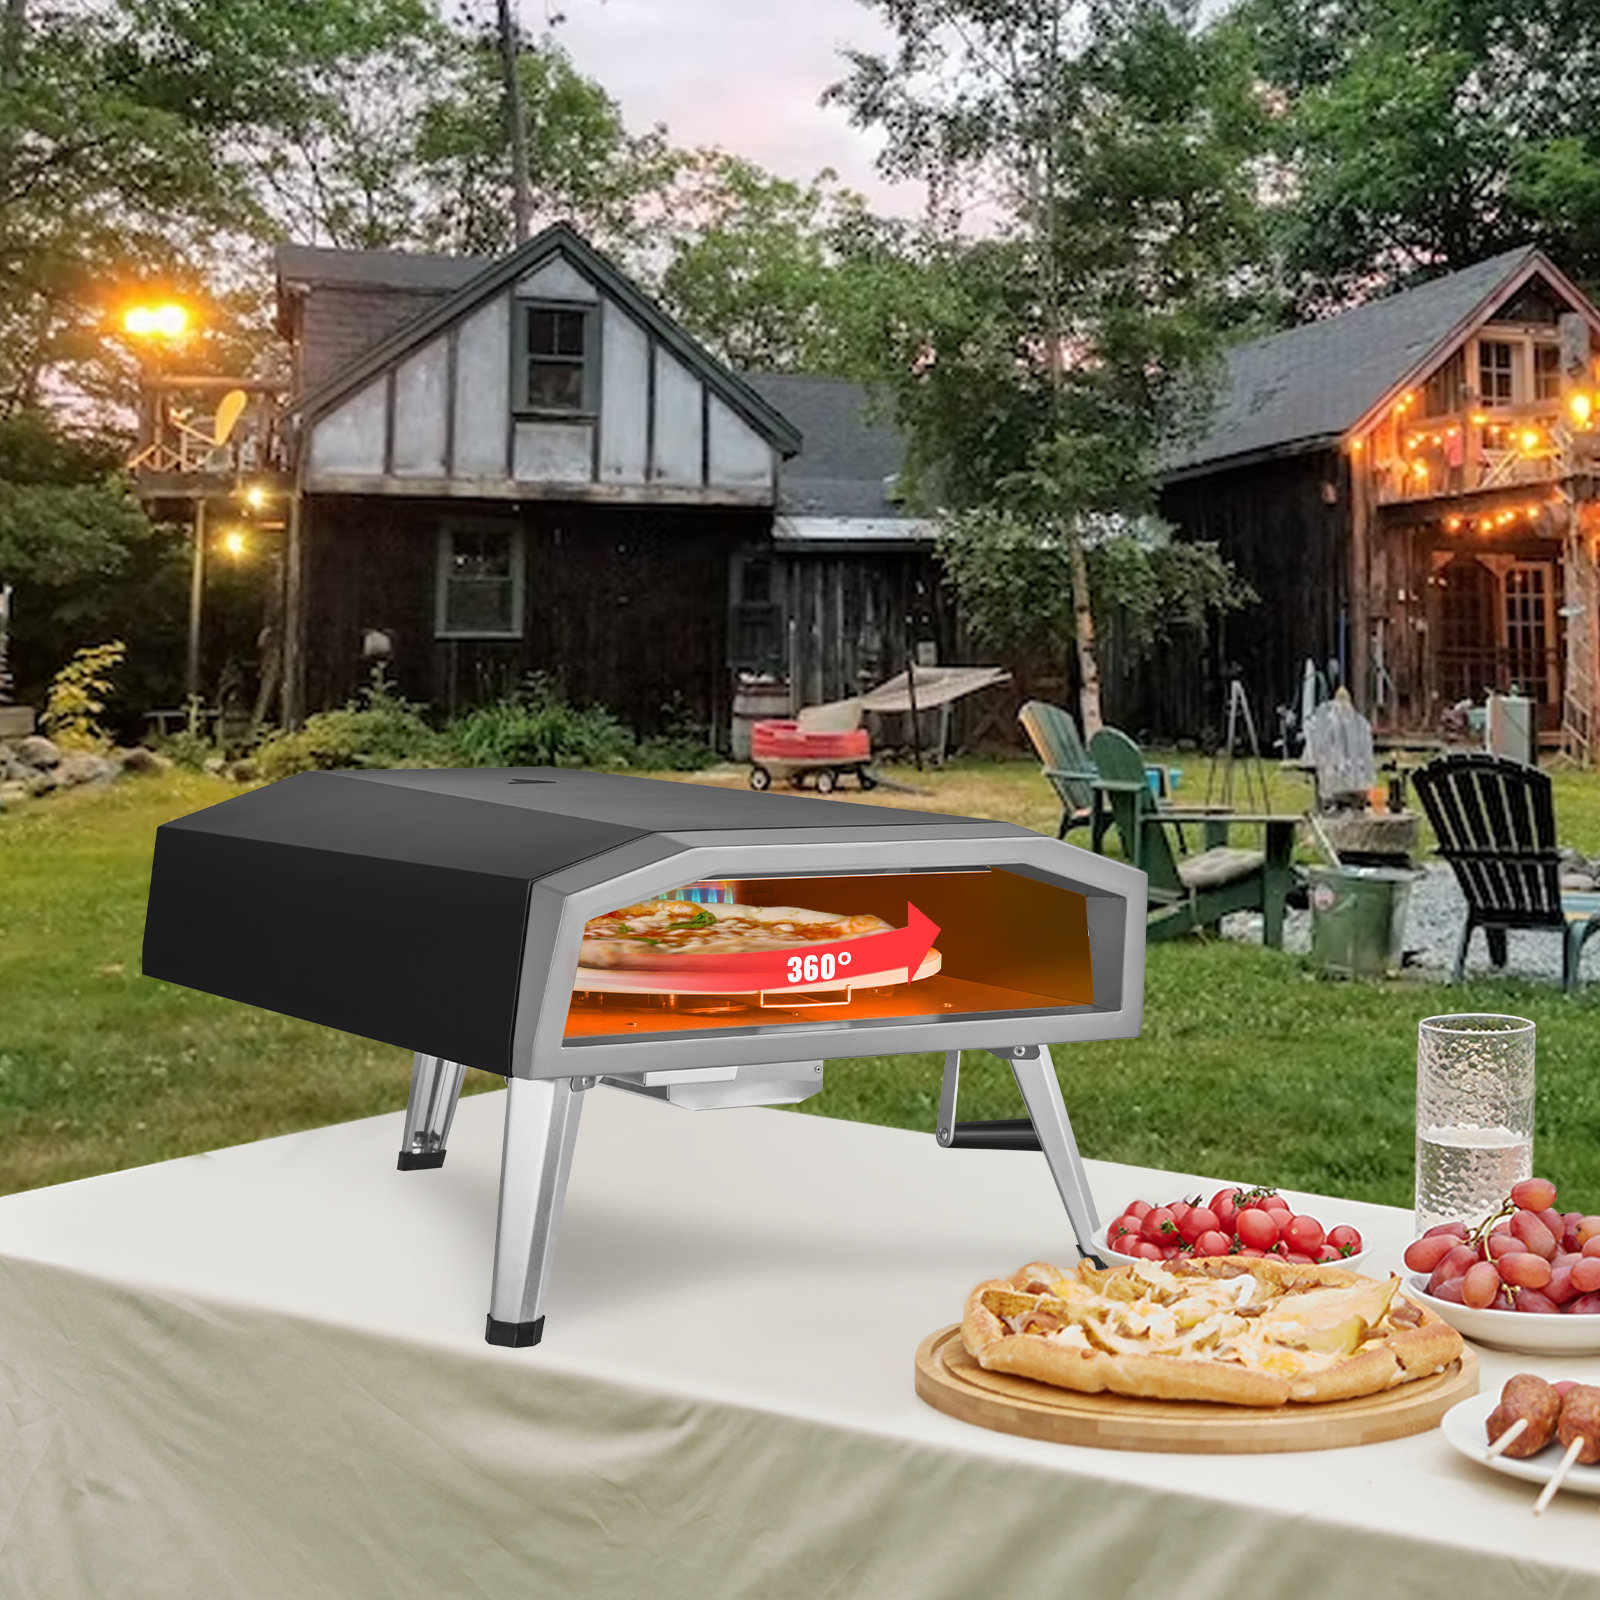 BIG HORN OUTDOORS Pizza Ovens Wood Pellet Pizza Oven Wood Fired Pizza Maker  Portable Stainless Steel Pizza Grill